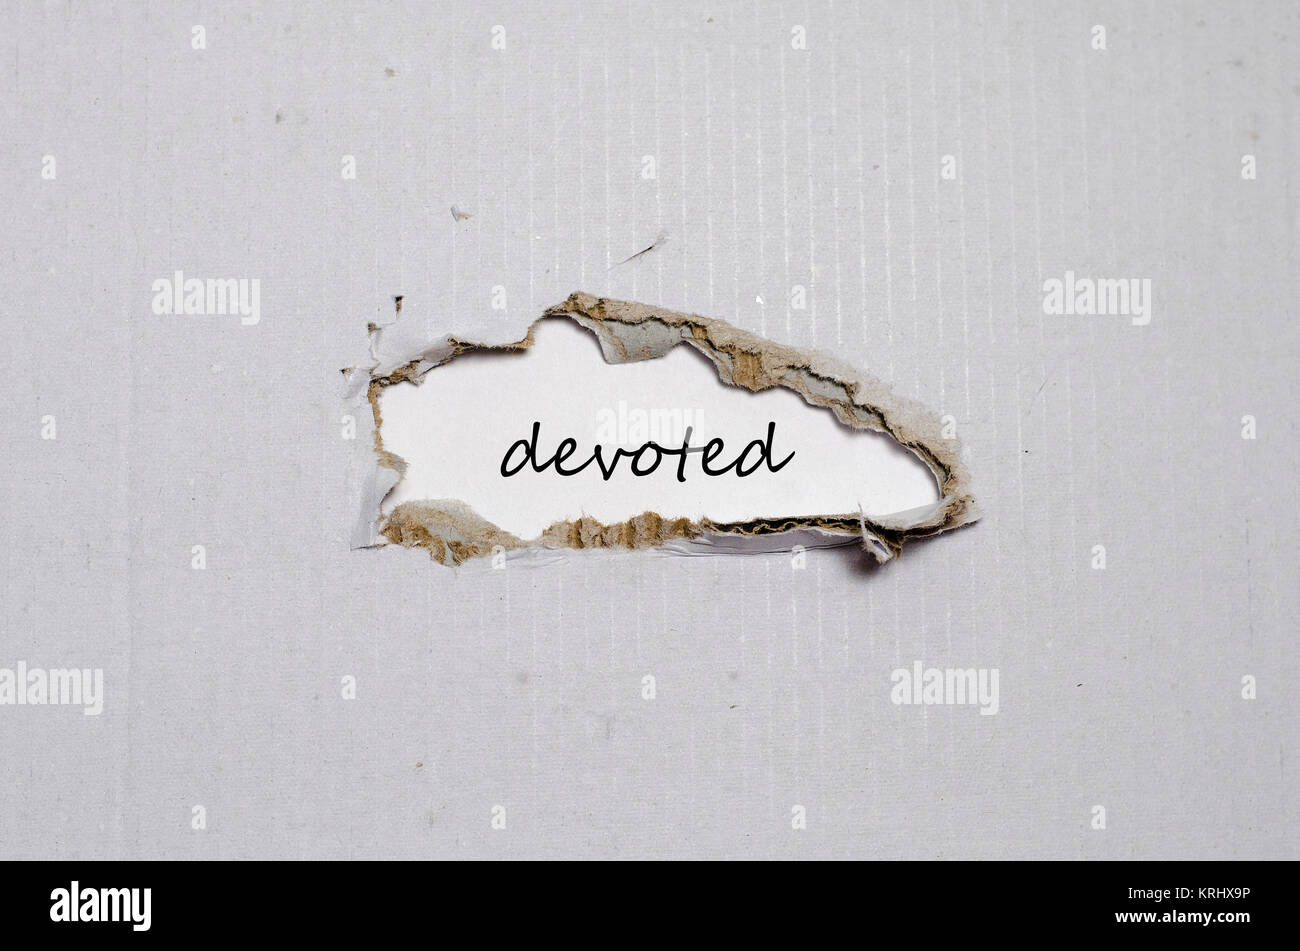 The word devoted appearing behind torn paper Stock Photo